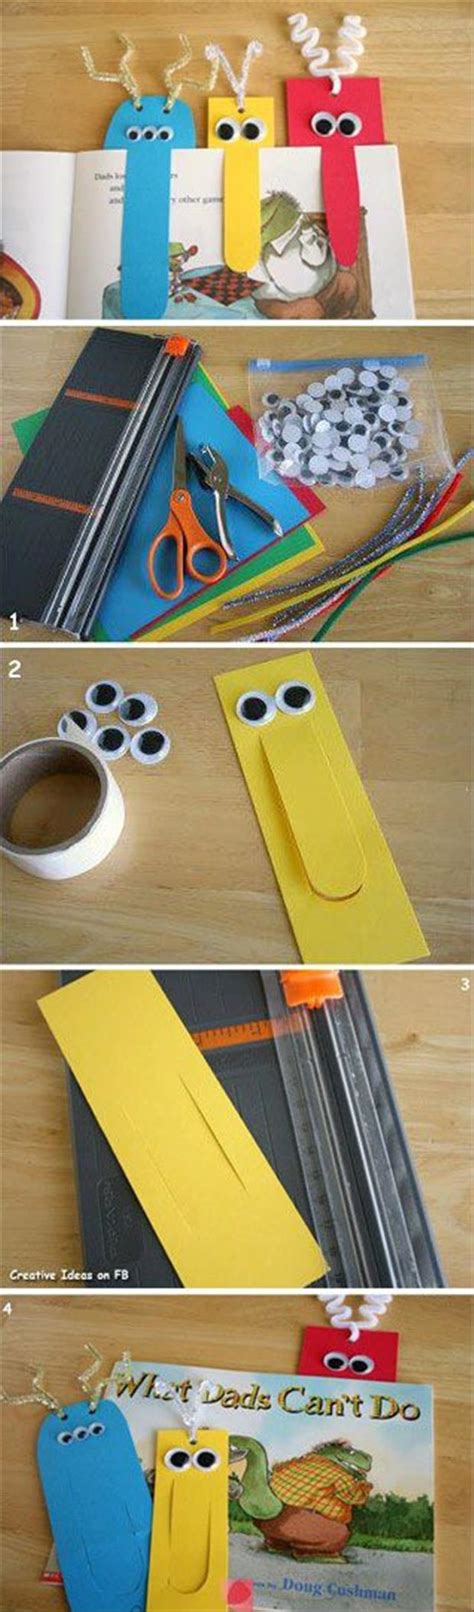 You don't have to be a crafting expert to create beautiful crafts. Fun Do It Yourself Craft Ideas - 31 Pics